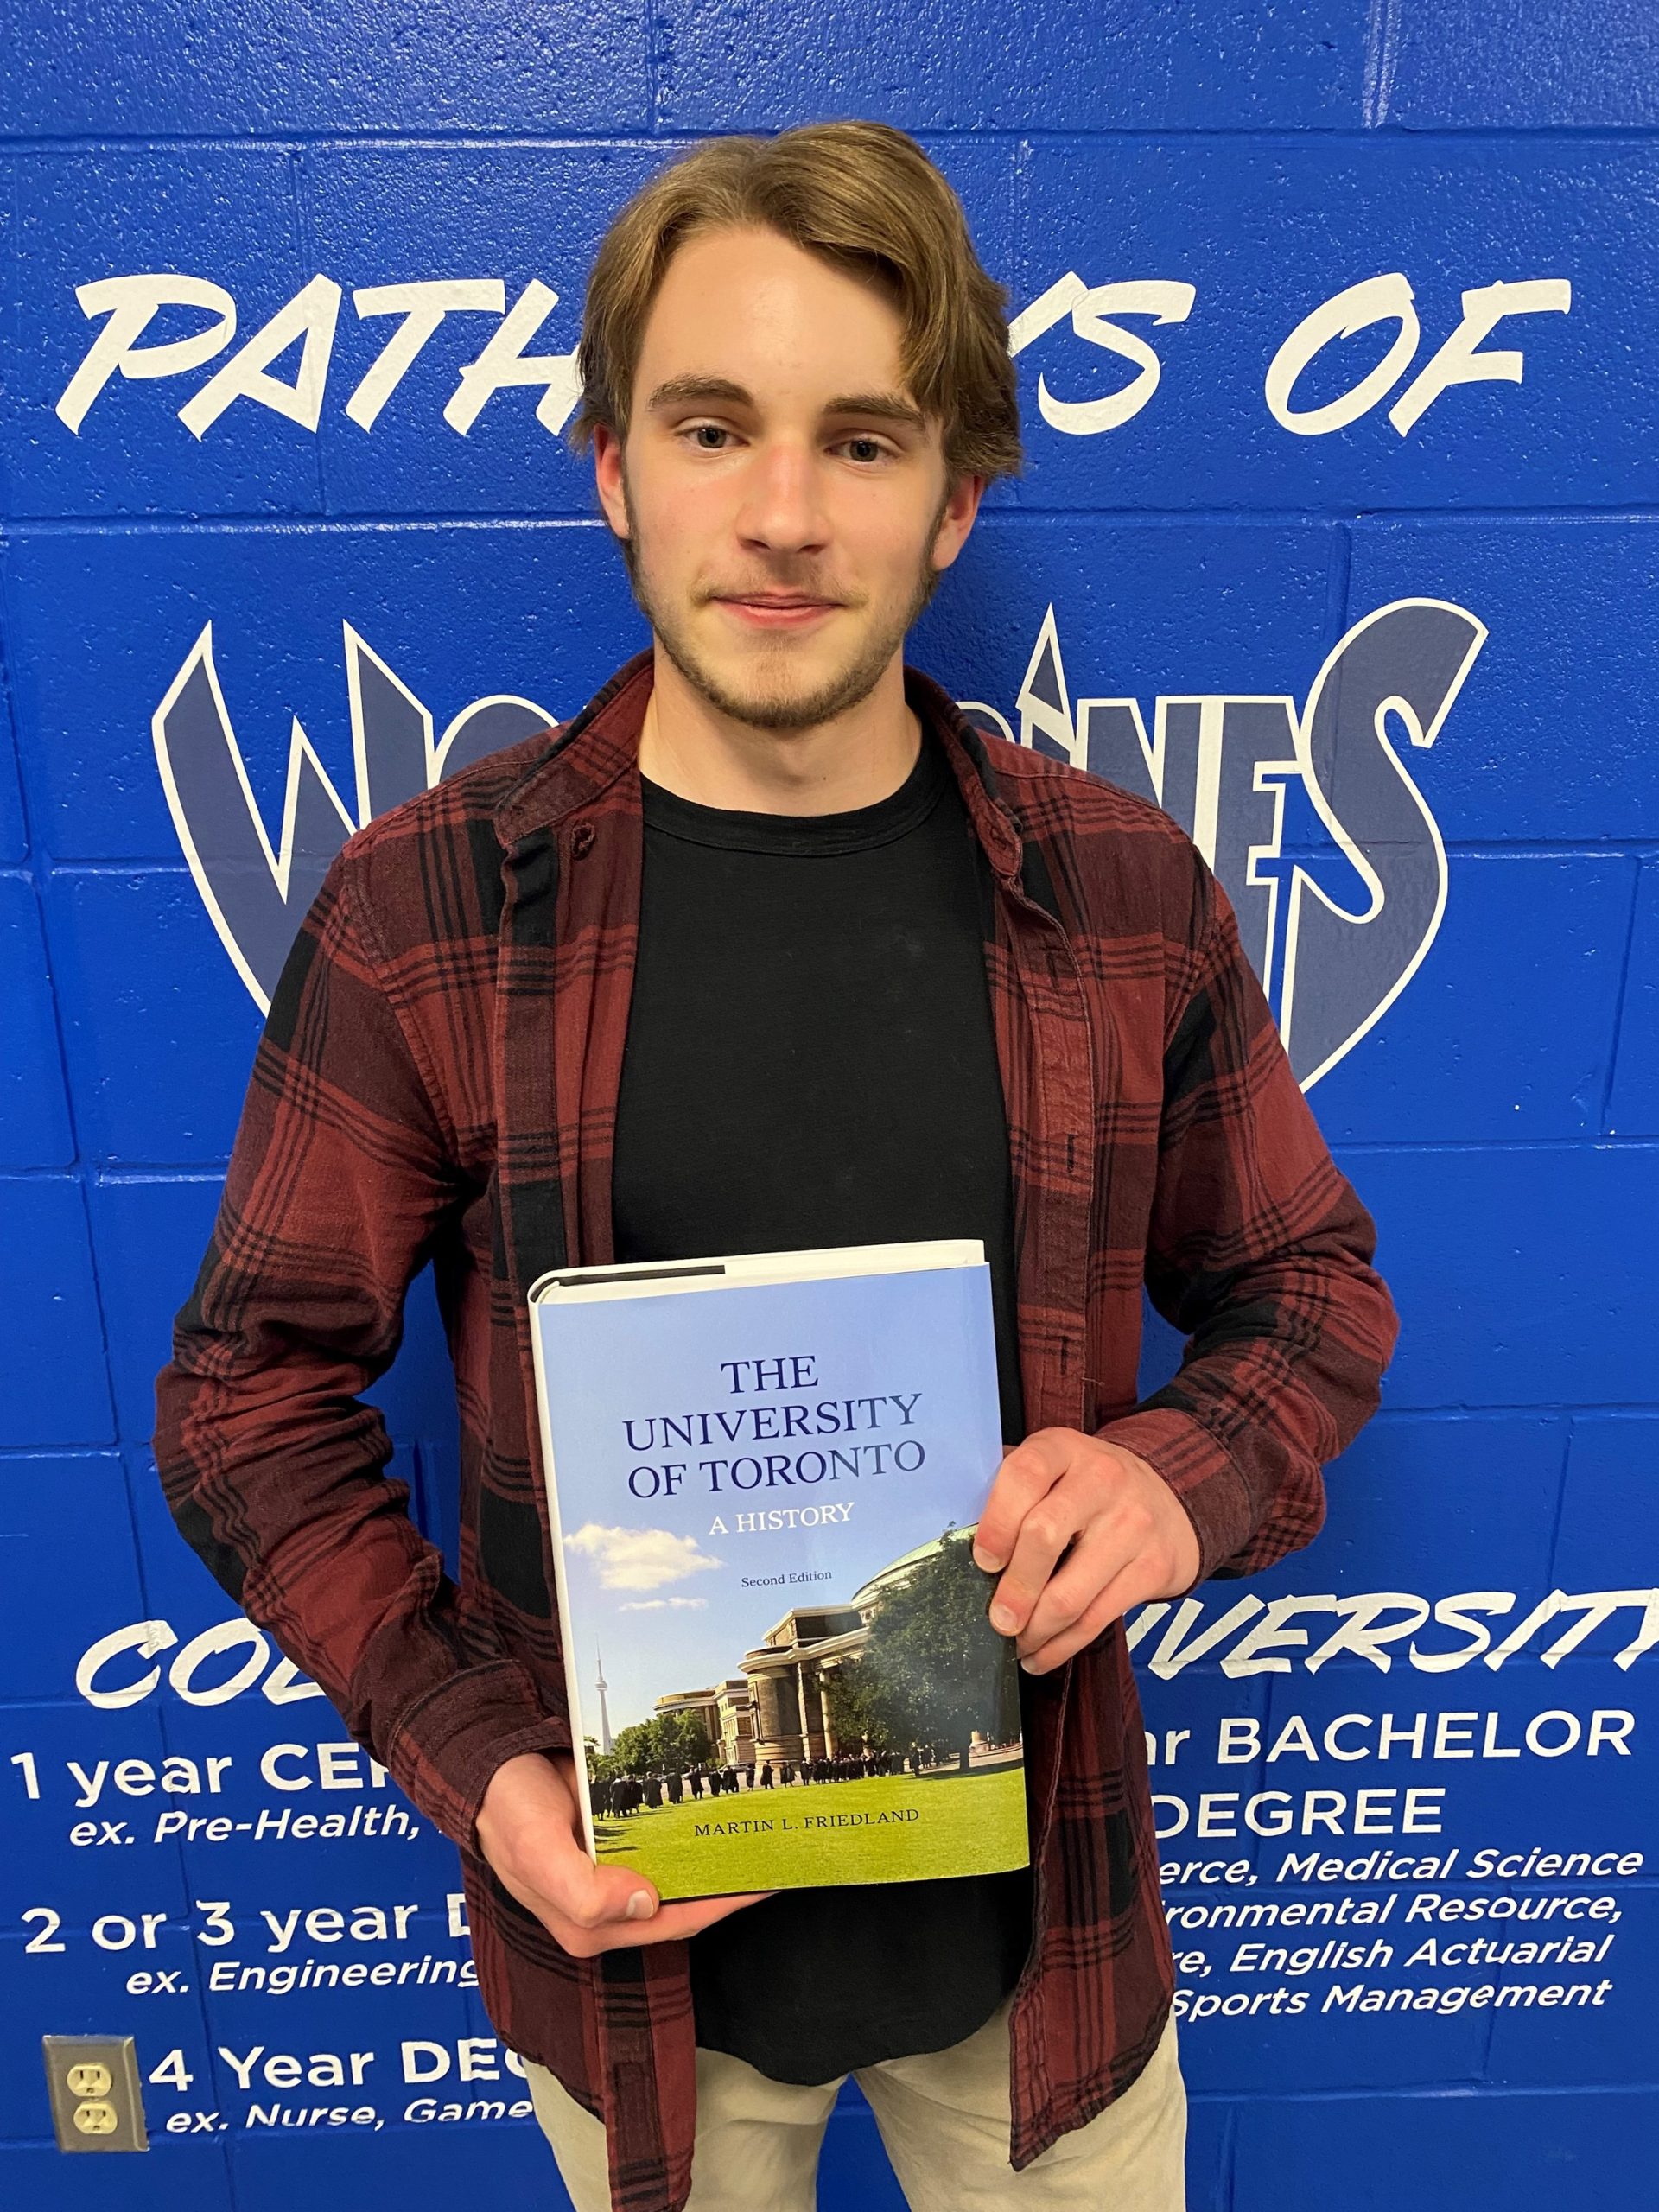 This photo features Joey T. holding a book on the history of The University of Toronto. 